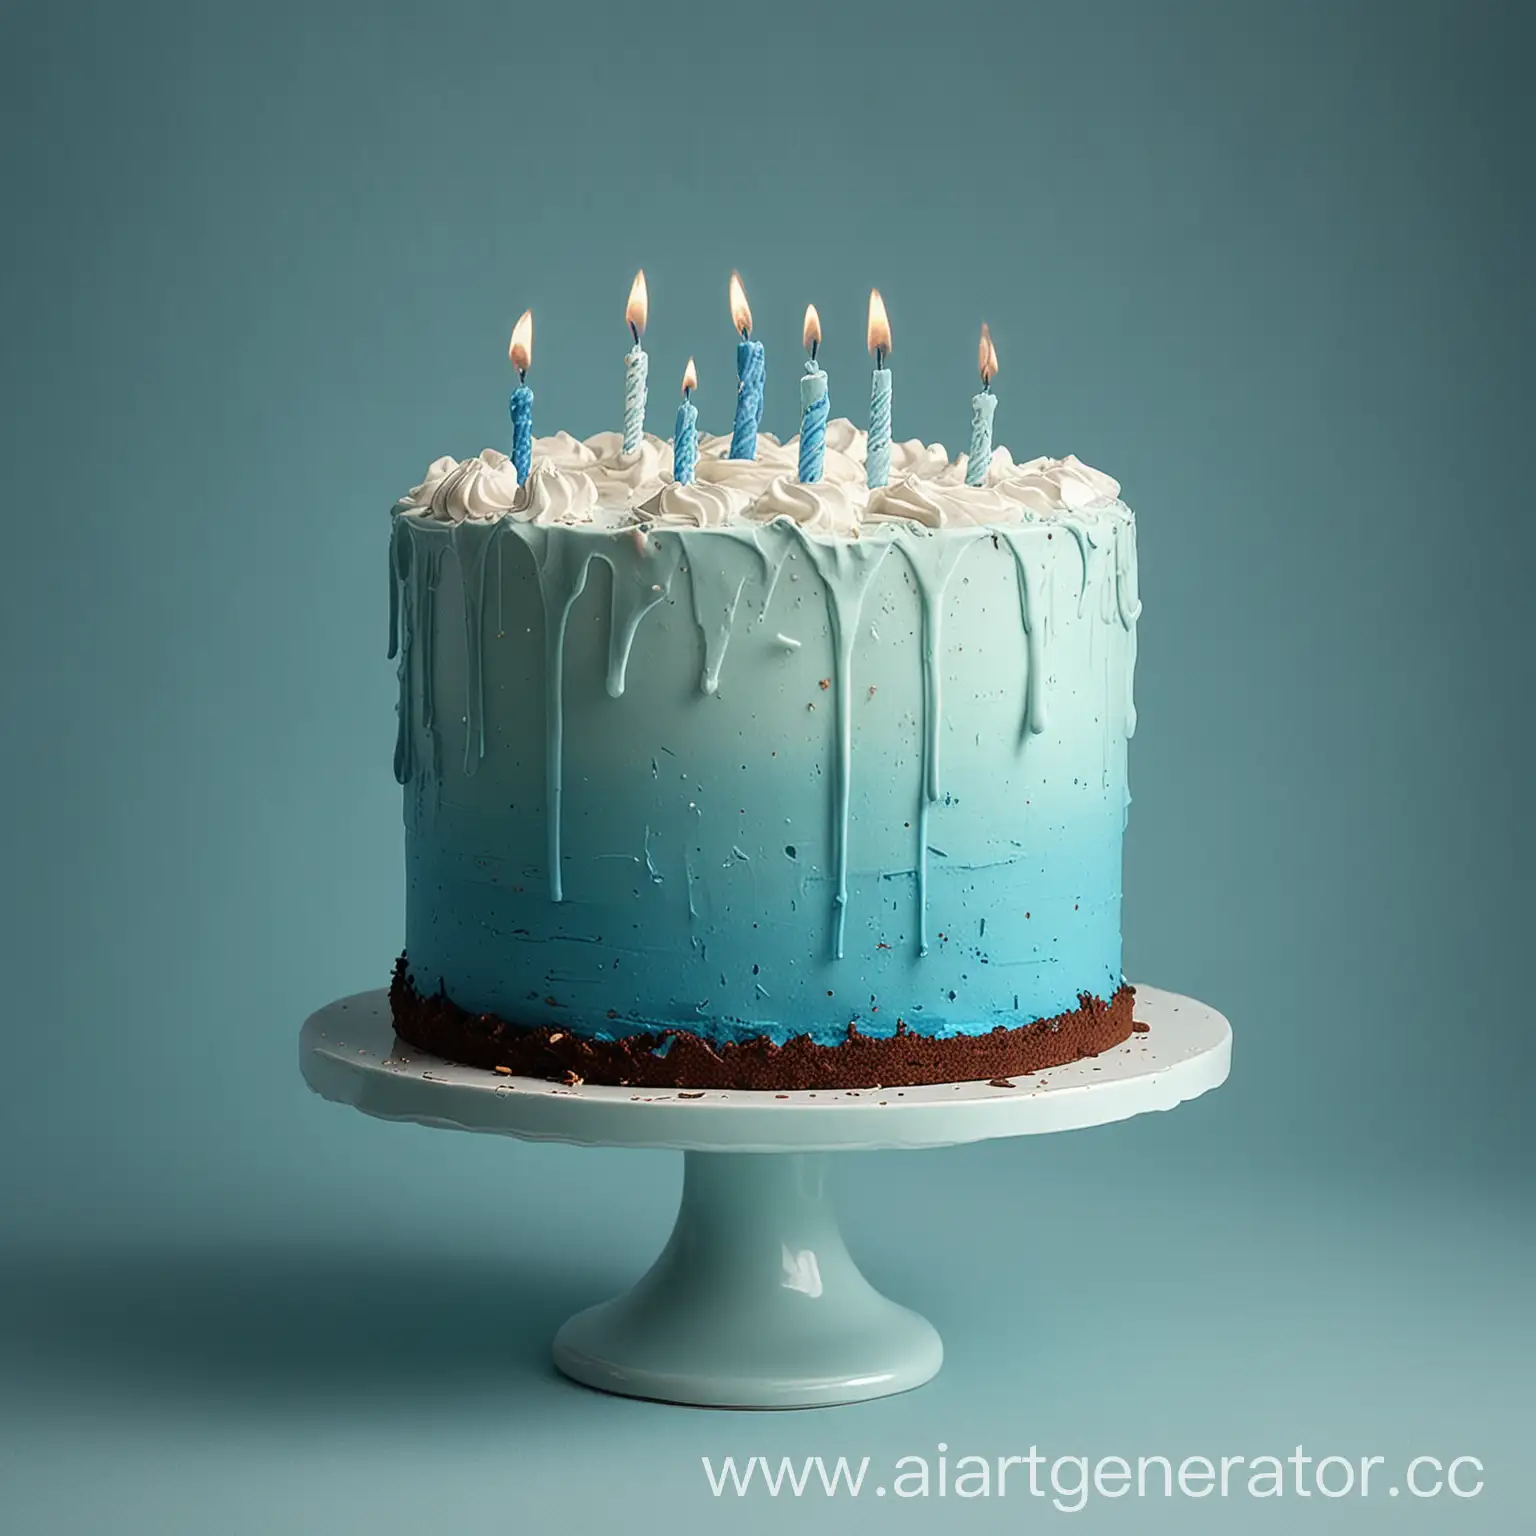 Happy-OneLayered-Cake-in-Blue-and-Light-Blue-on-a-Cheerful-Background